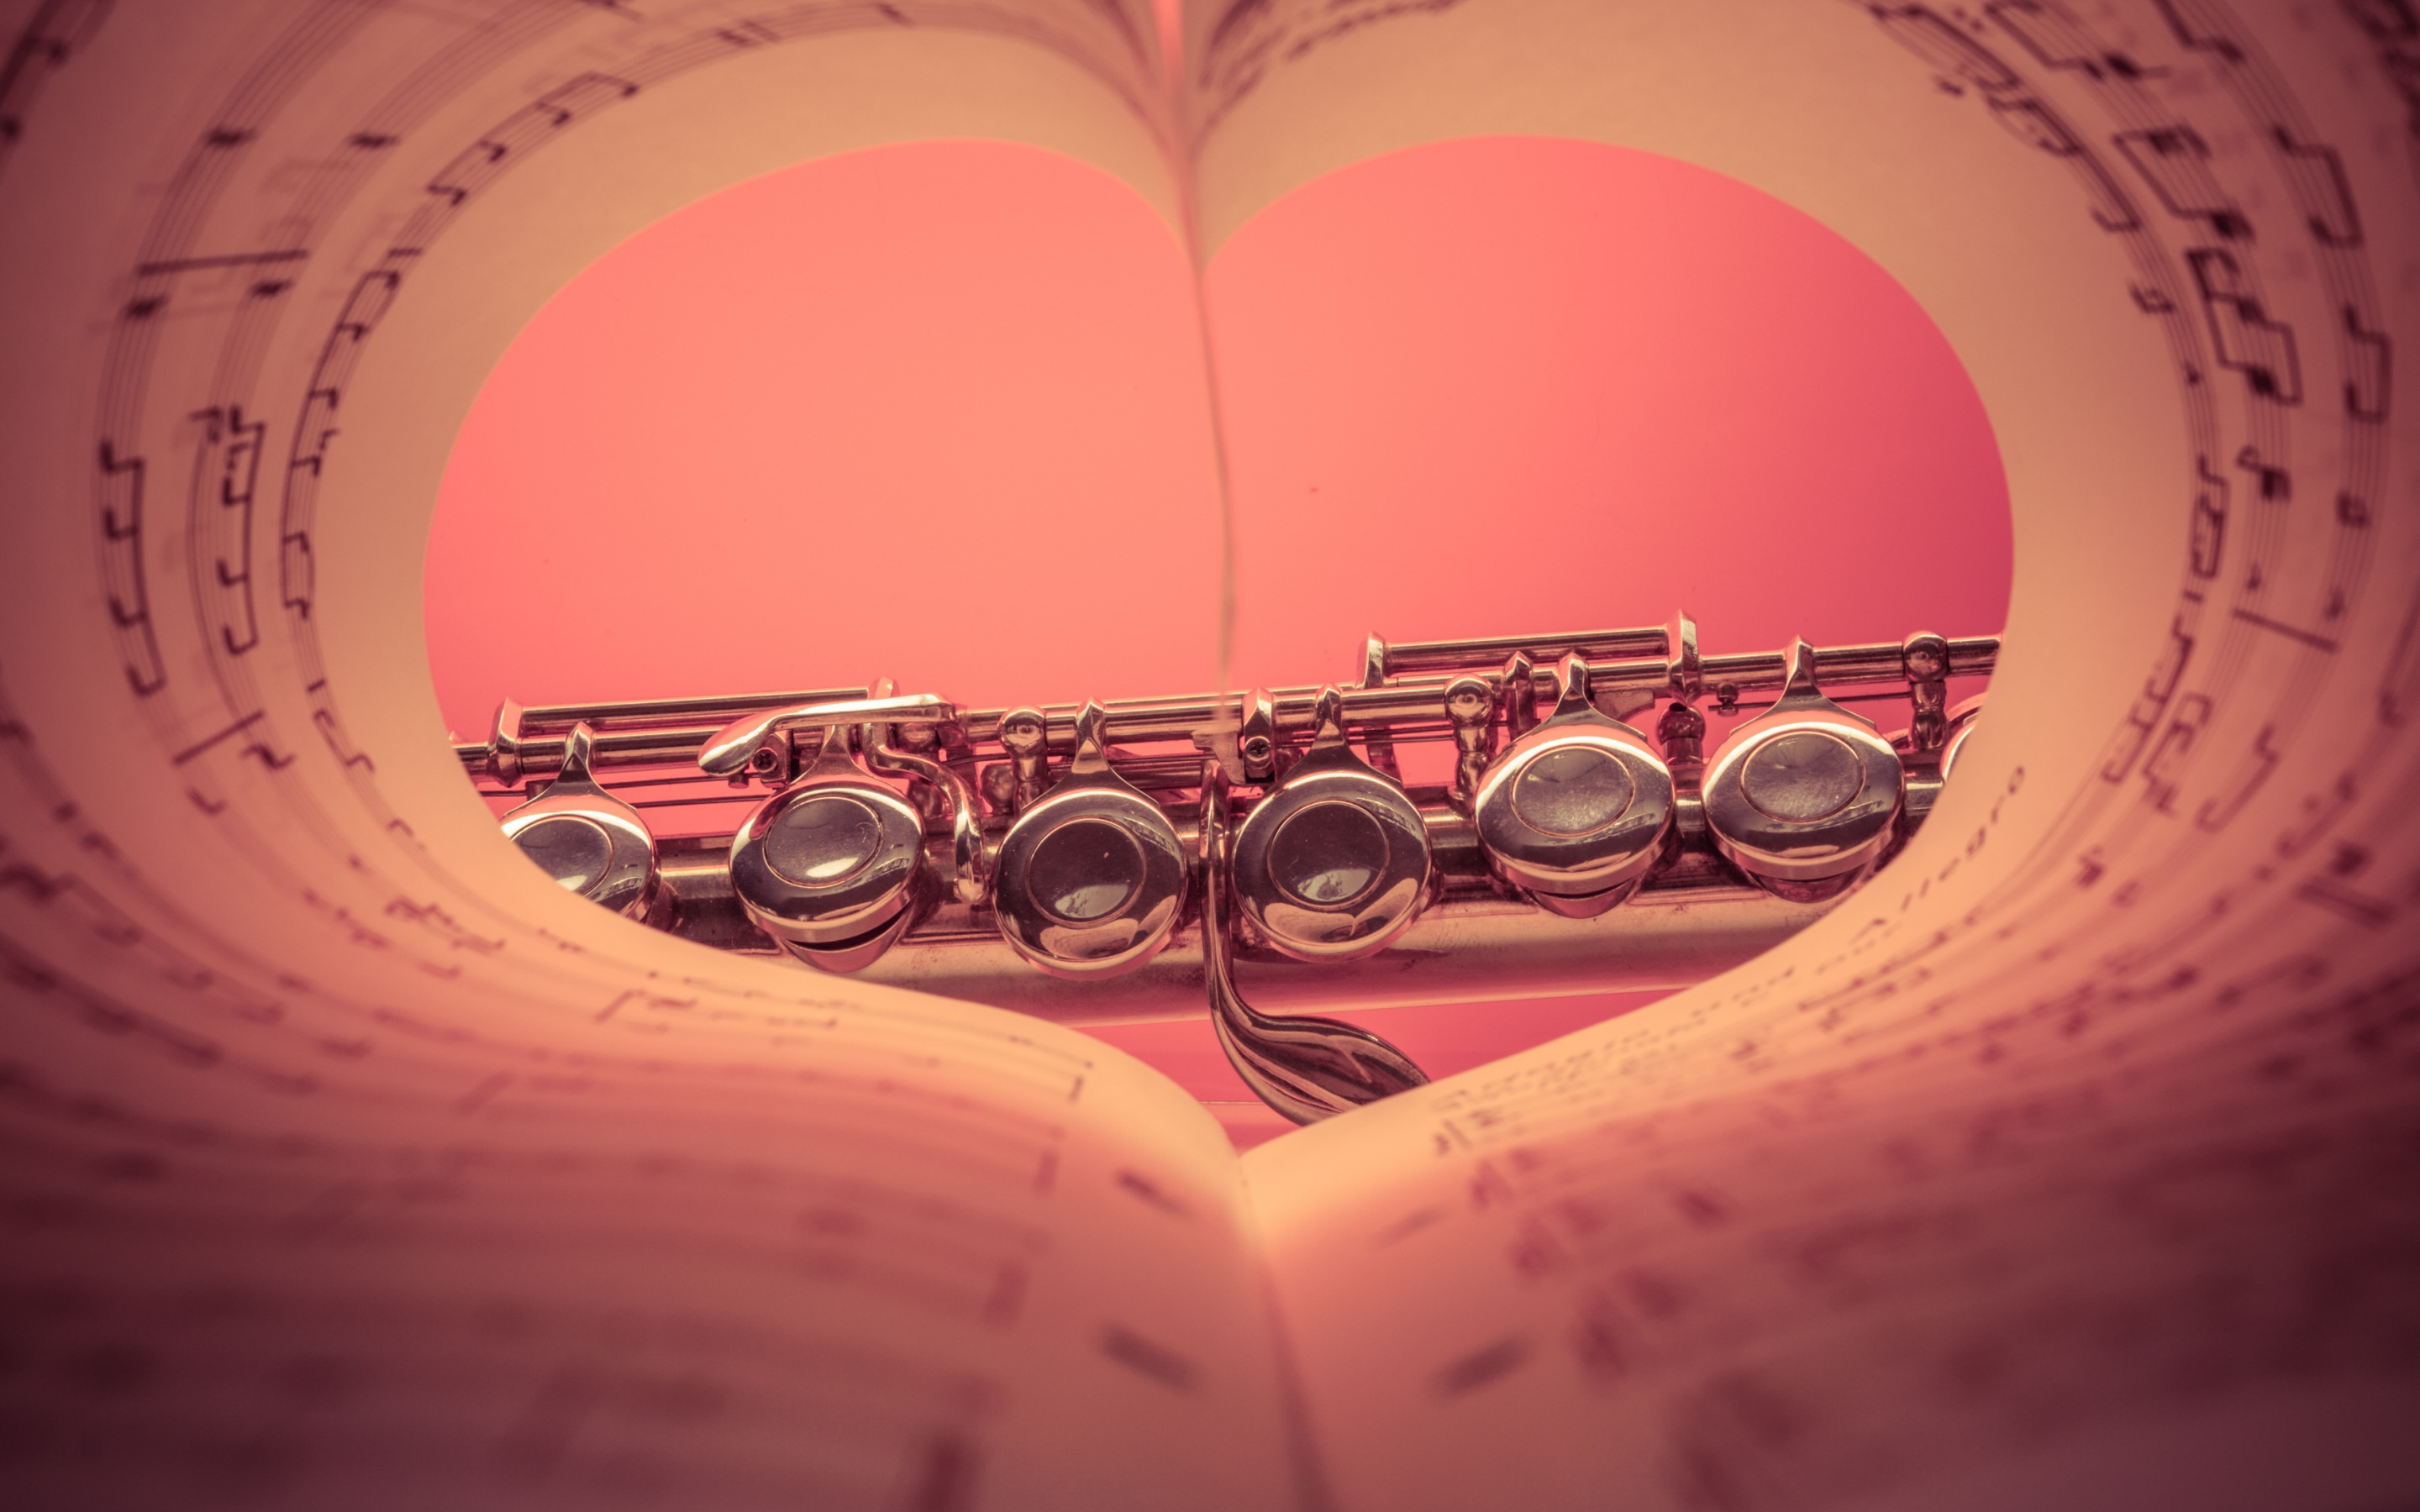 Flute: Love music, Notes, Shape of the heart, The earliest known identifiable musical instrument. 2880x1800 HD Wallpaper.